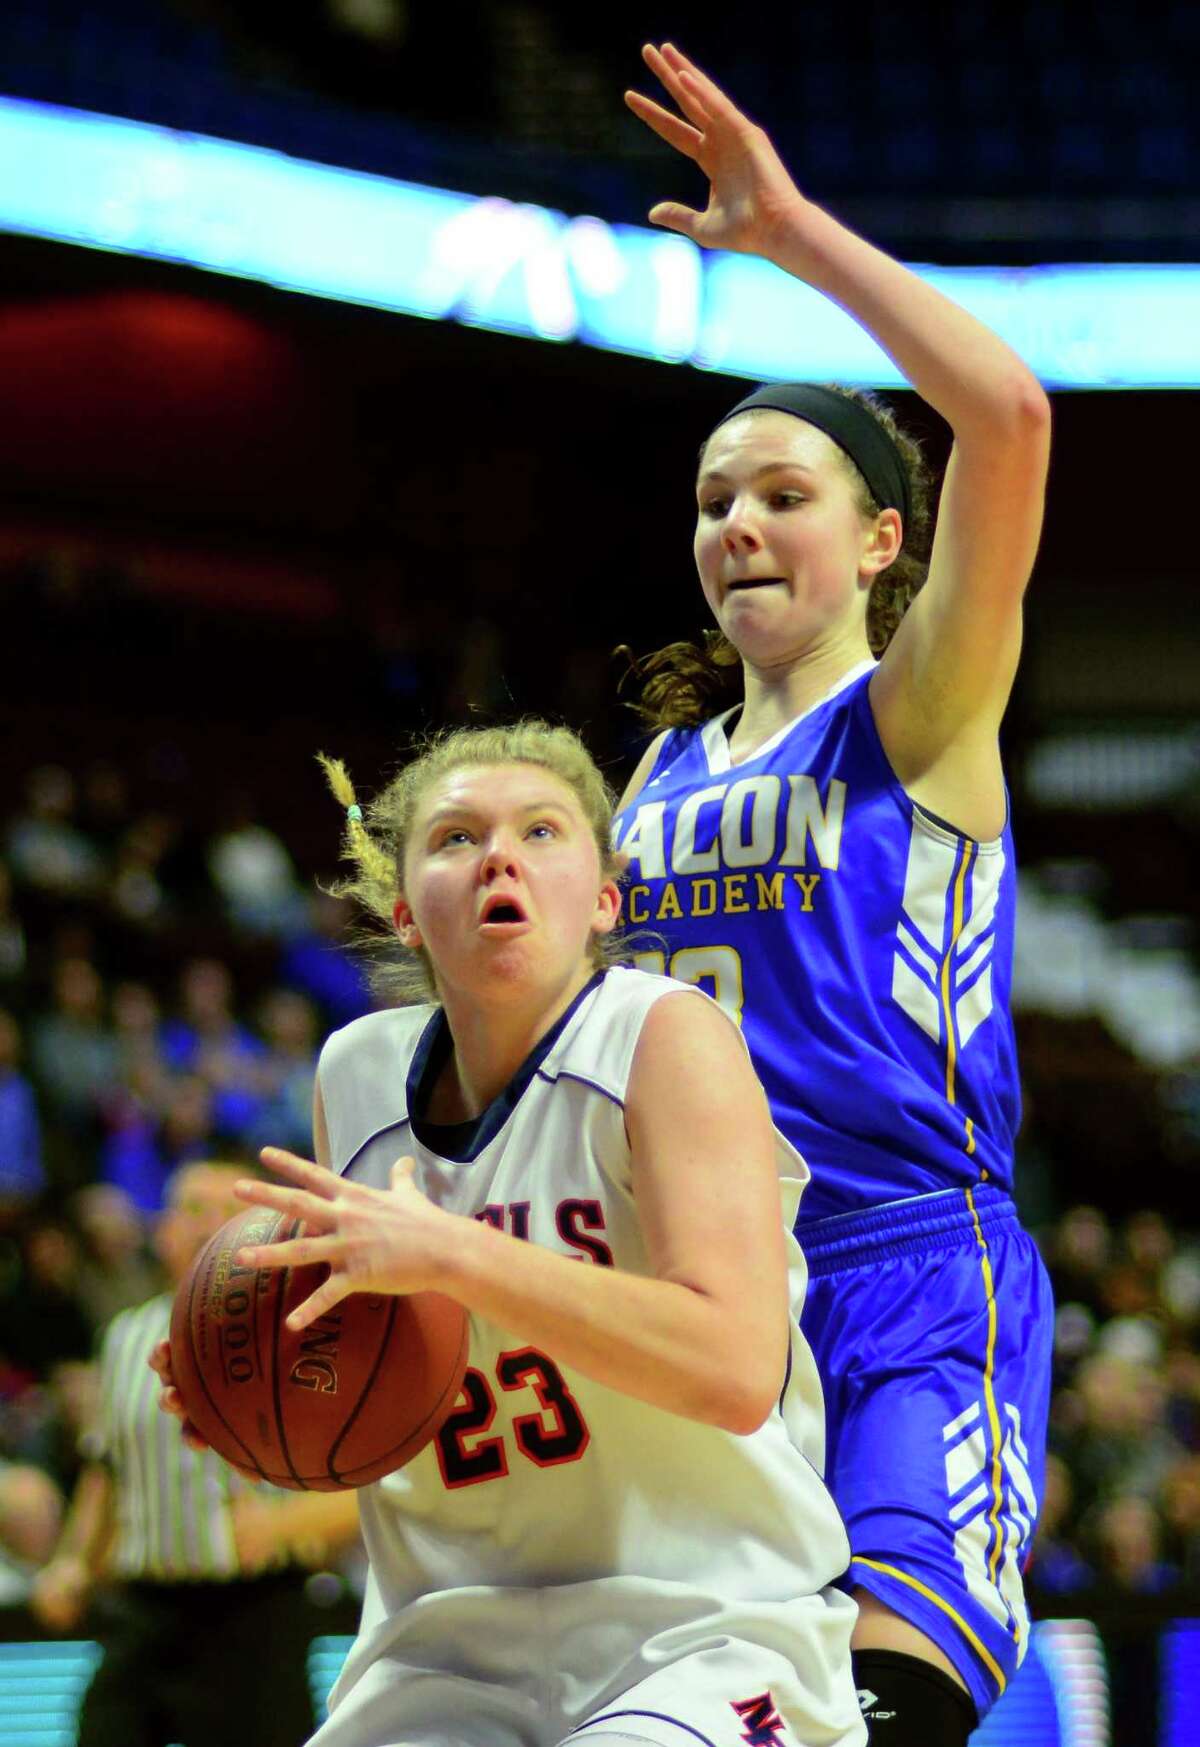 New Fairfield’s Kristen Teklits eyes the basket as Bacon Academy’s Jocelyn Luizzi comes in from behind to defend during their Class M championship game Saturday at the Mohegan Sun Arena.